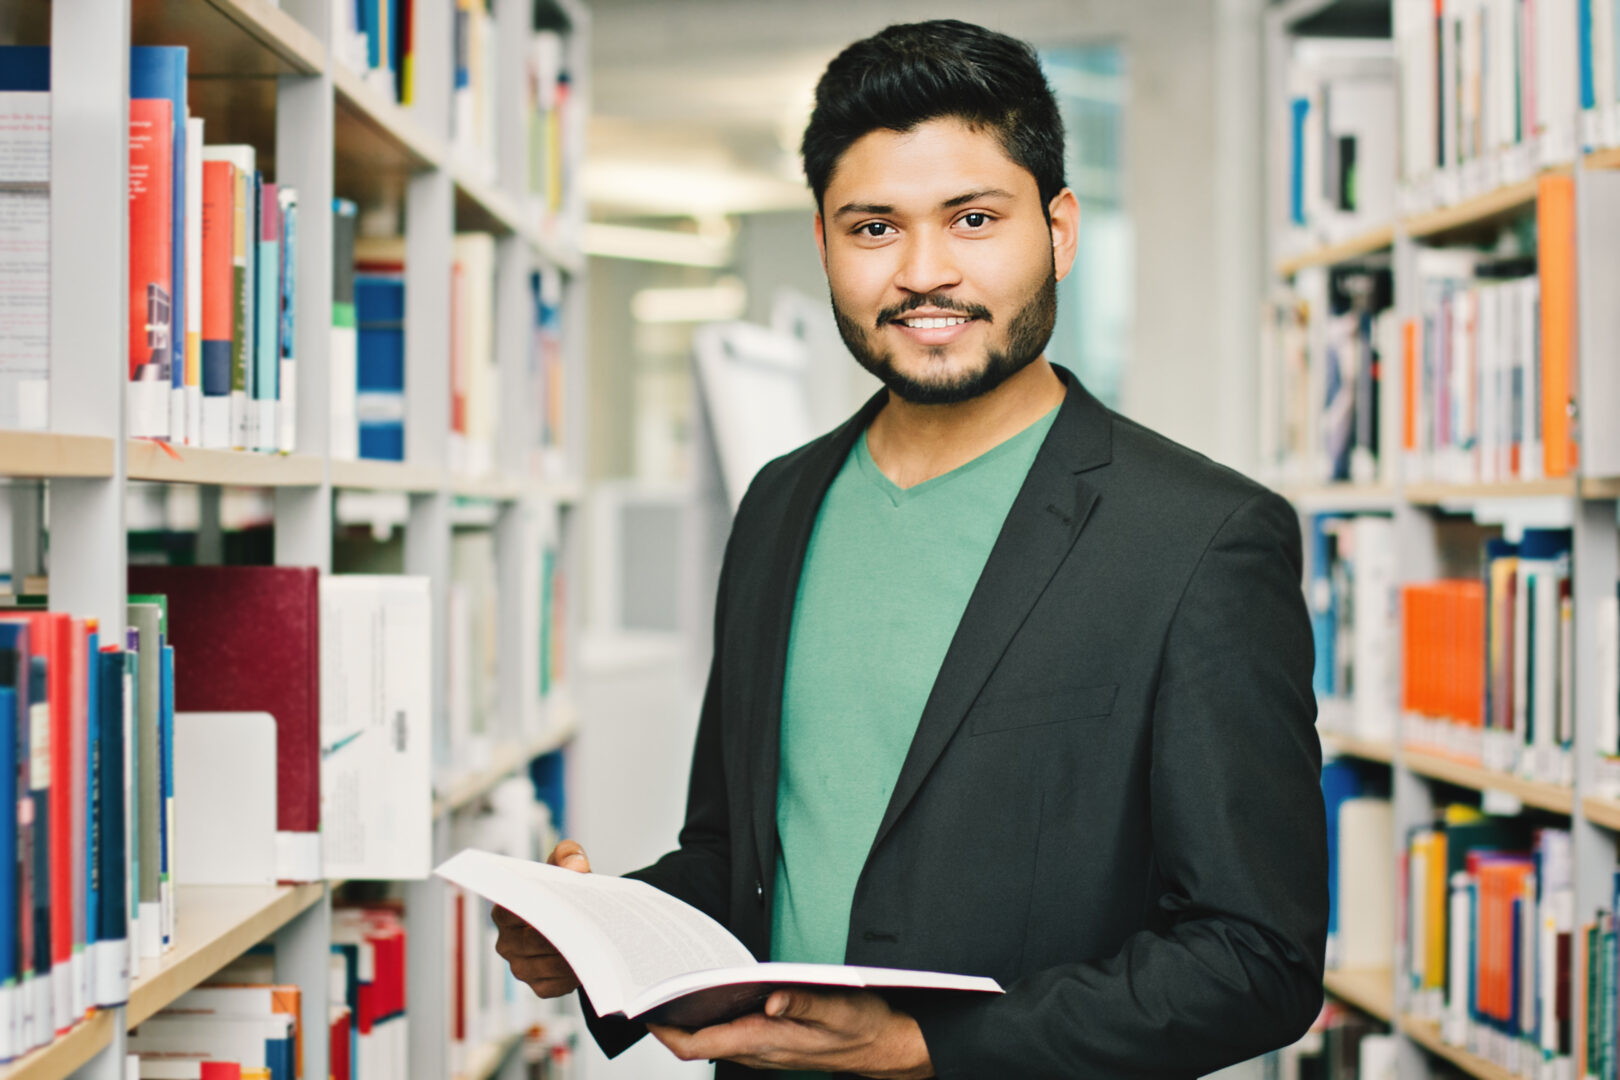 Indian male in library smiling